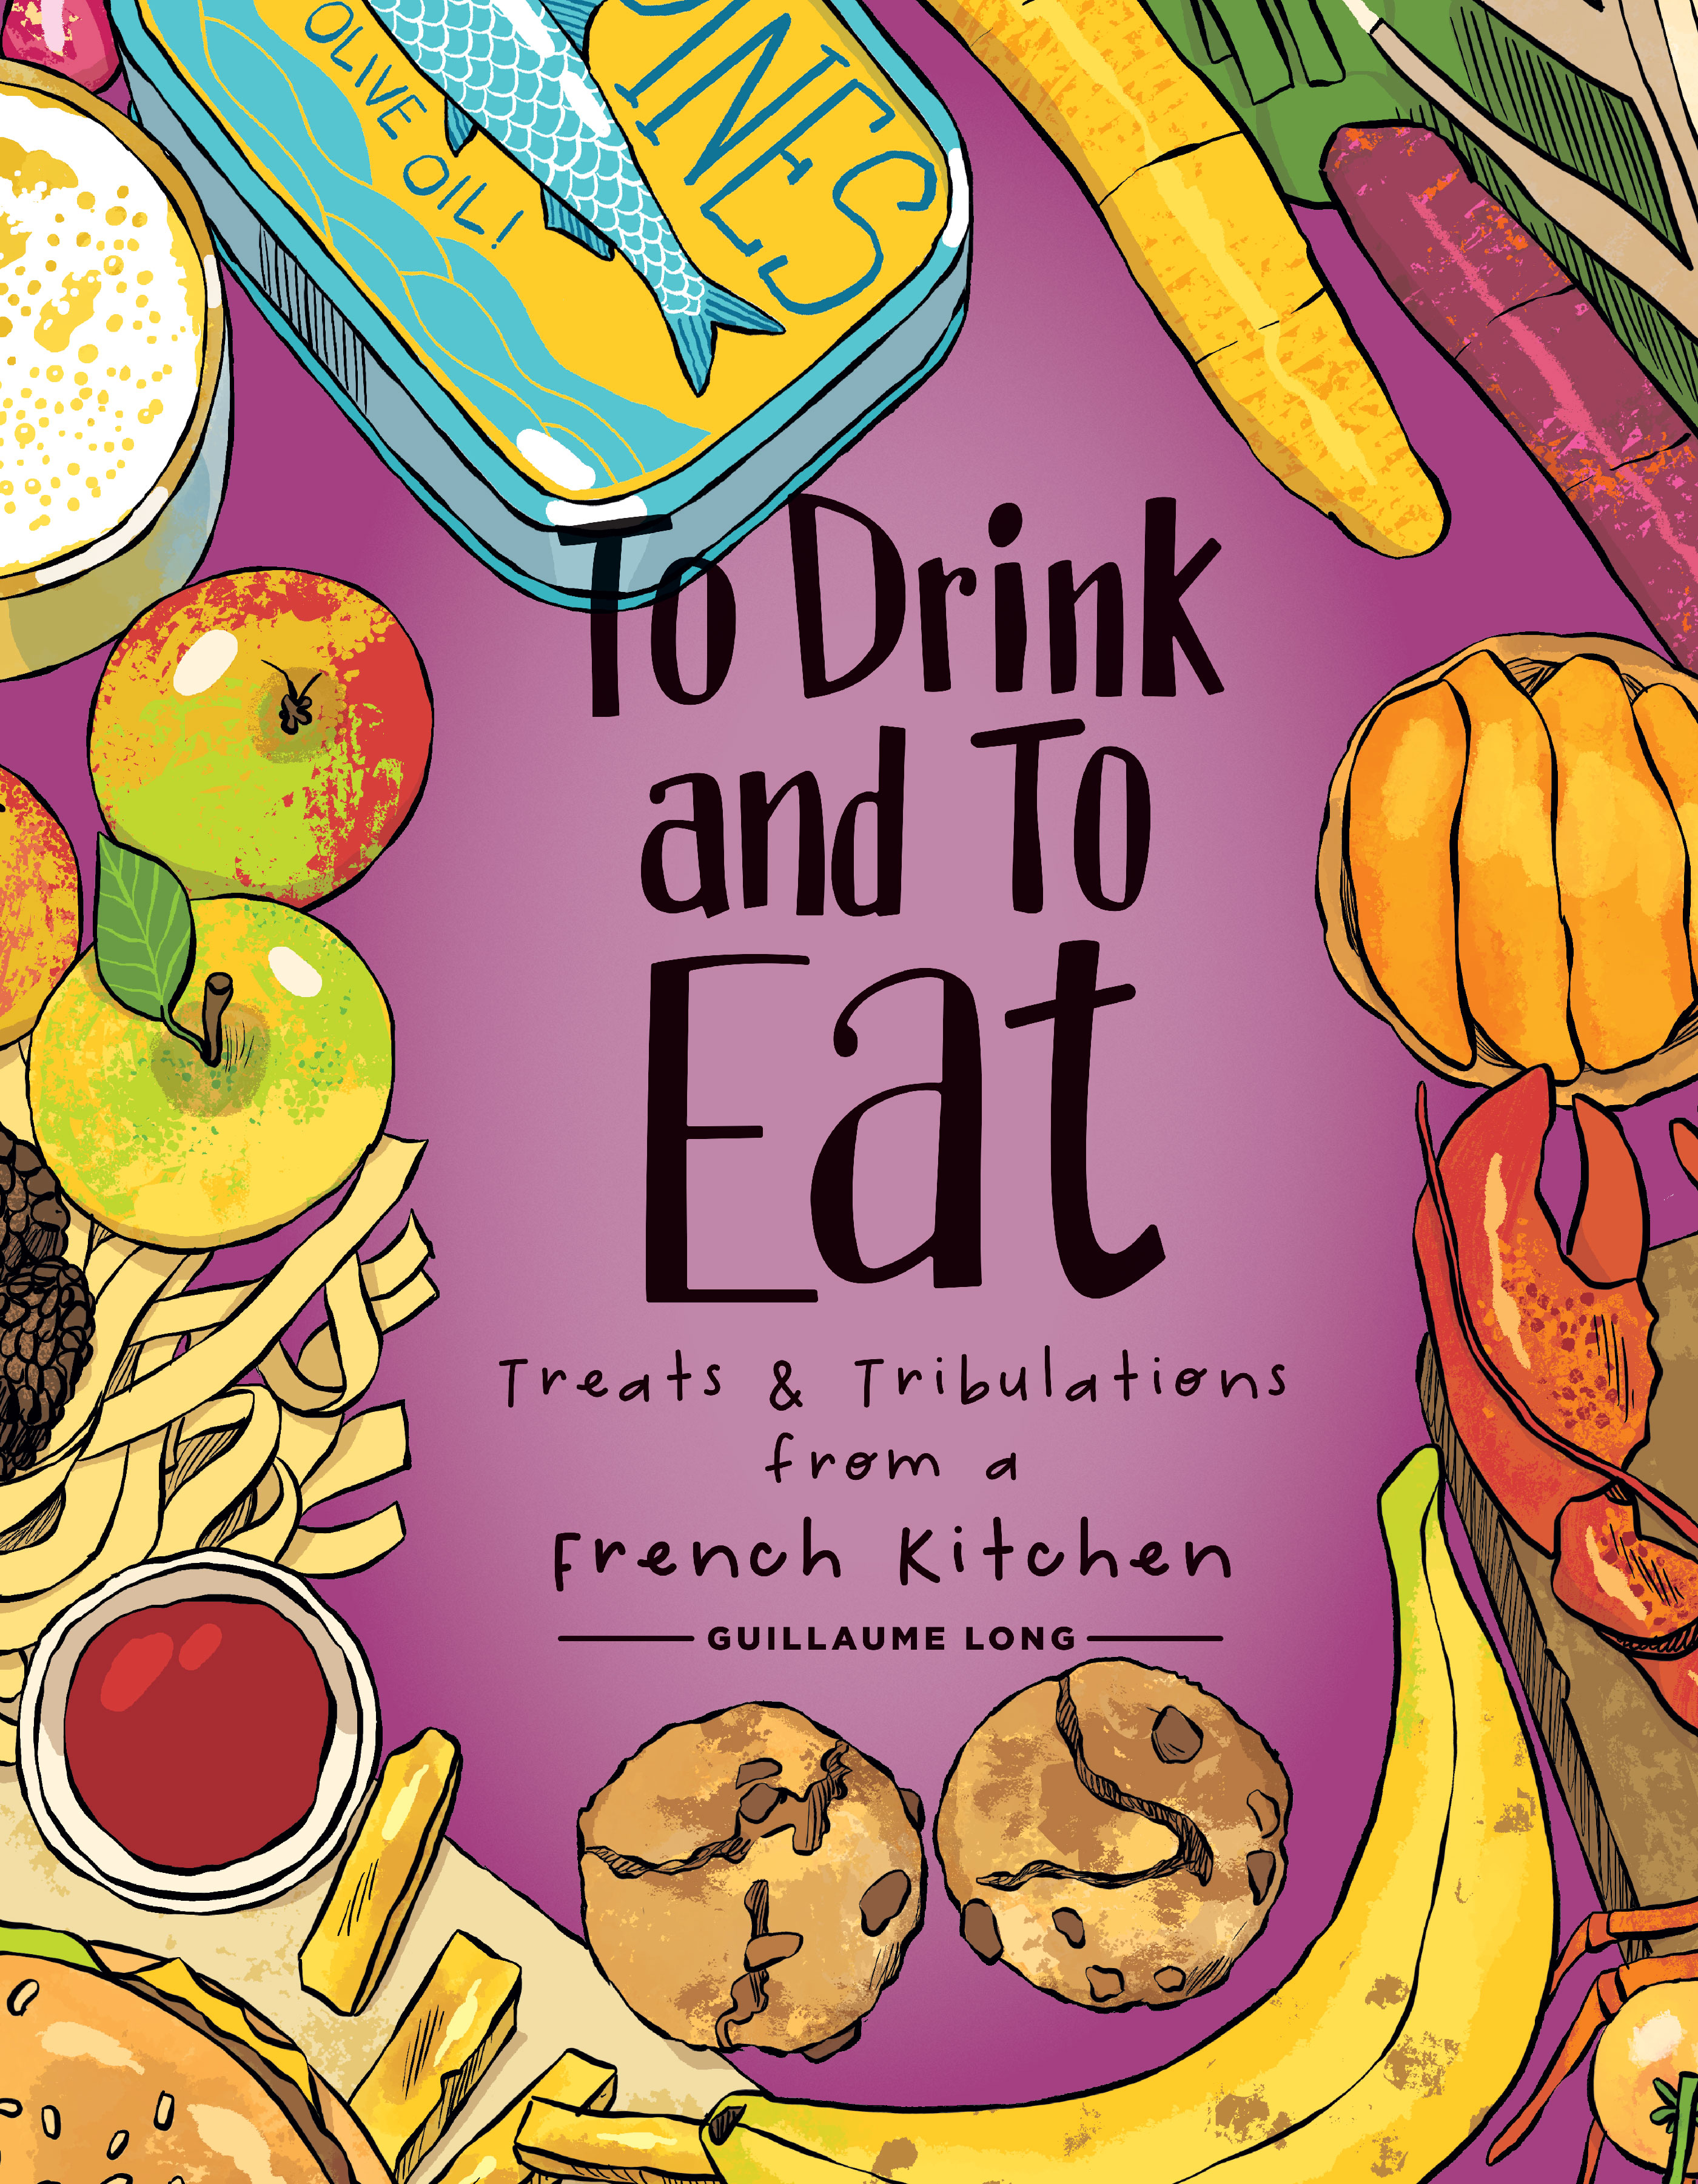 To Drink & Eat Hardcover Volume 3 (Mature)